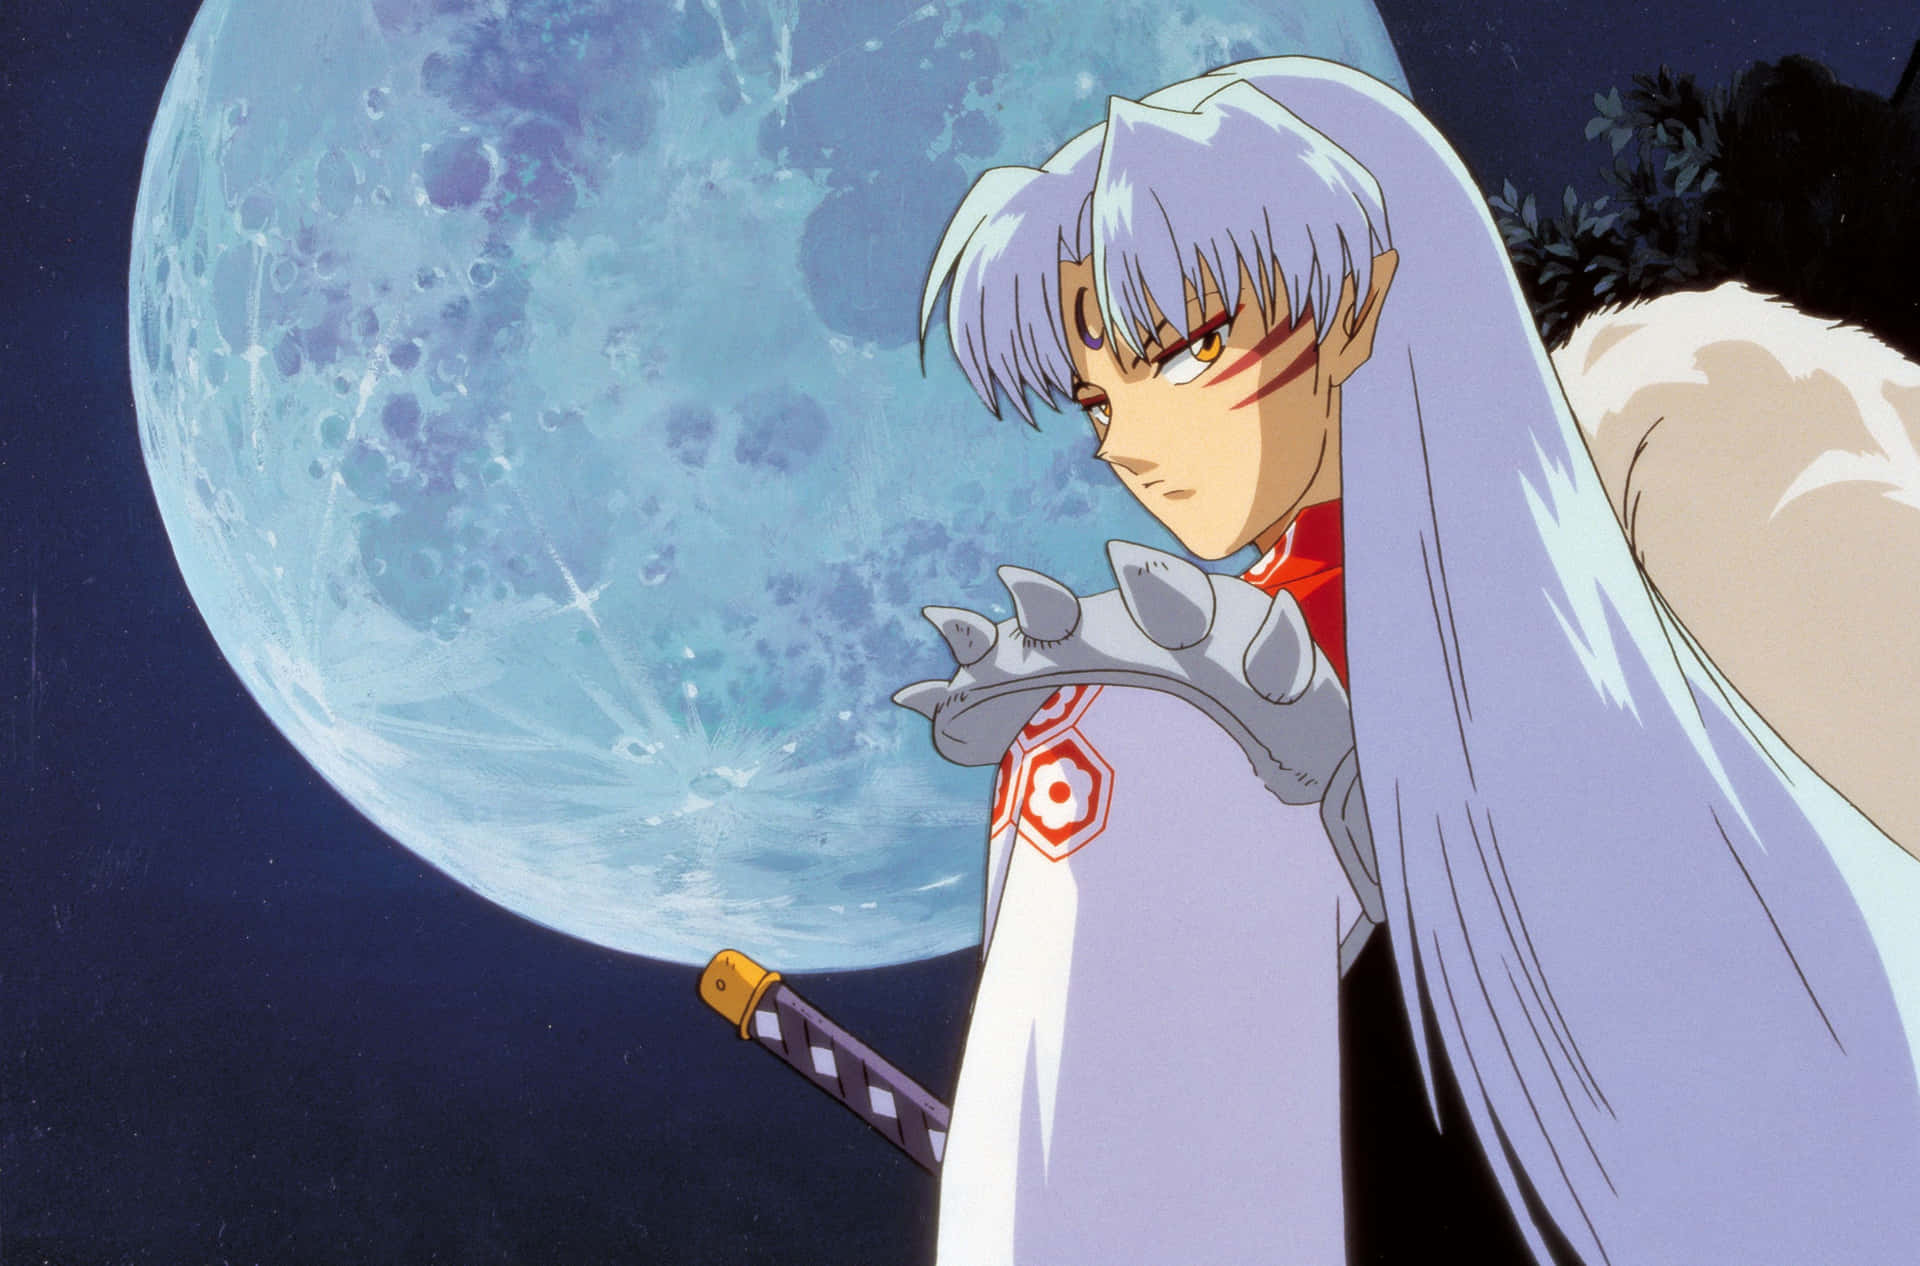 Inuyasha and Sesshomaru standing side by side in an intense moment. Wallpaper